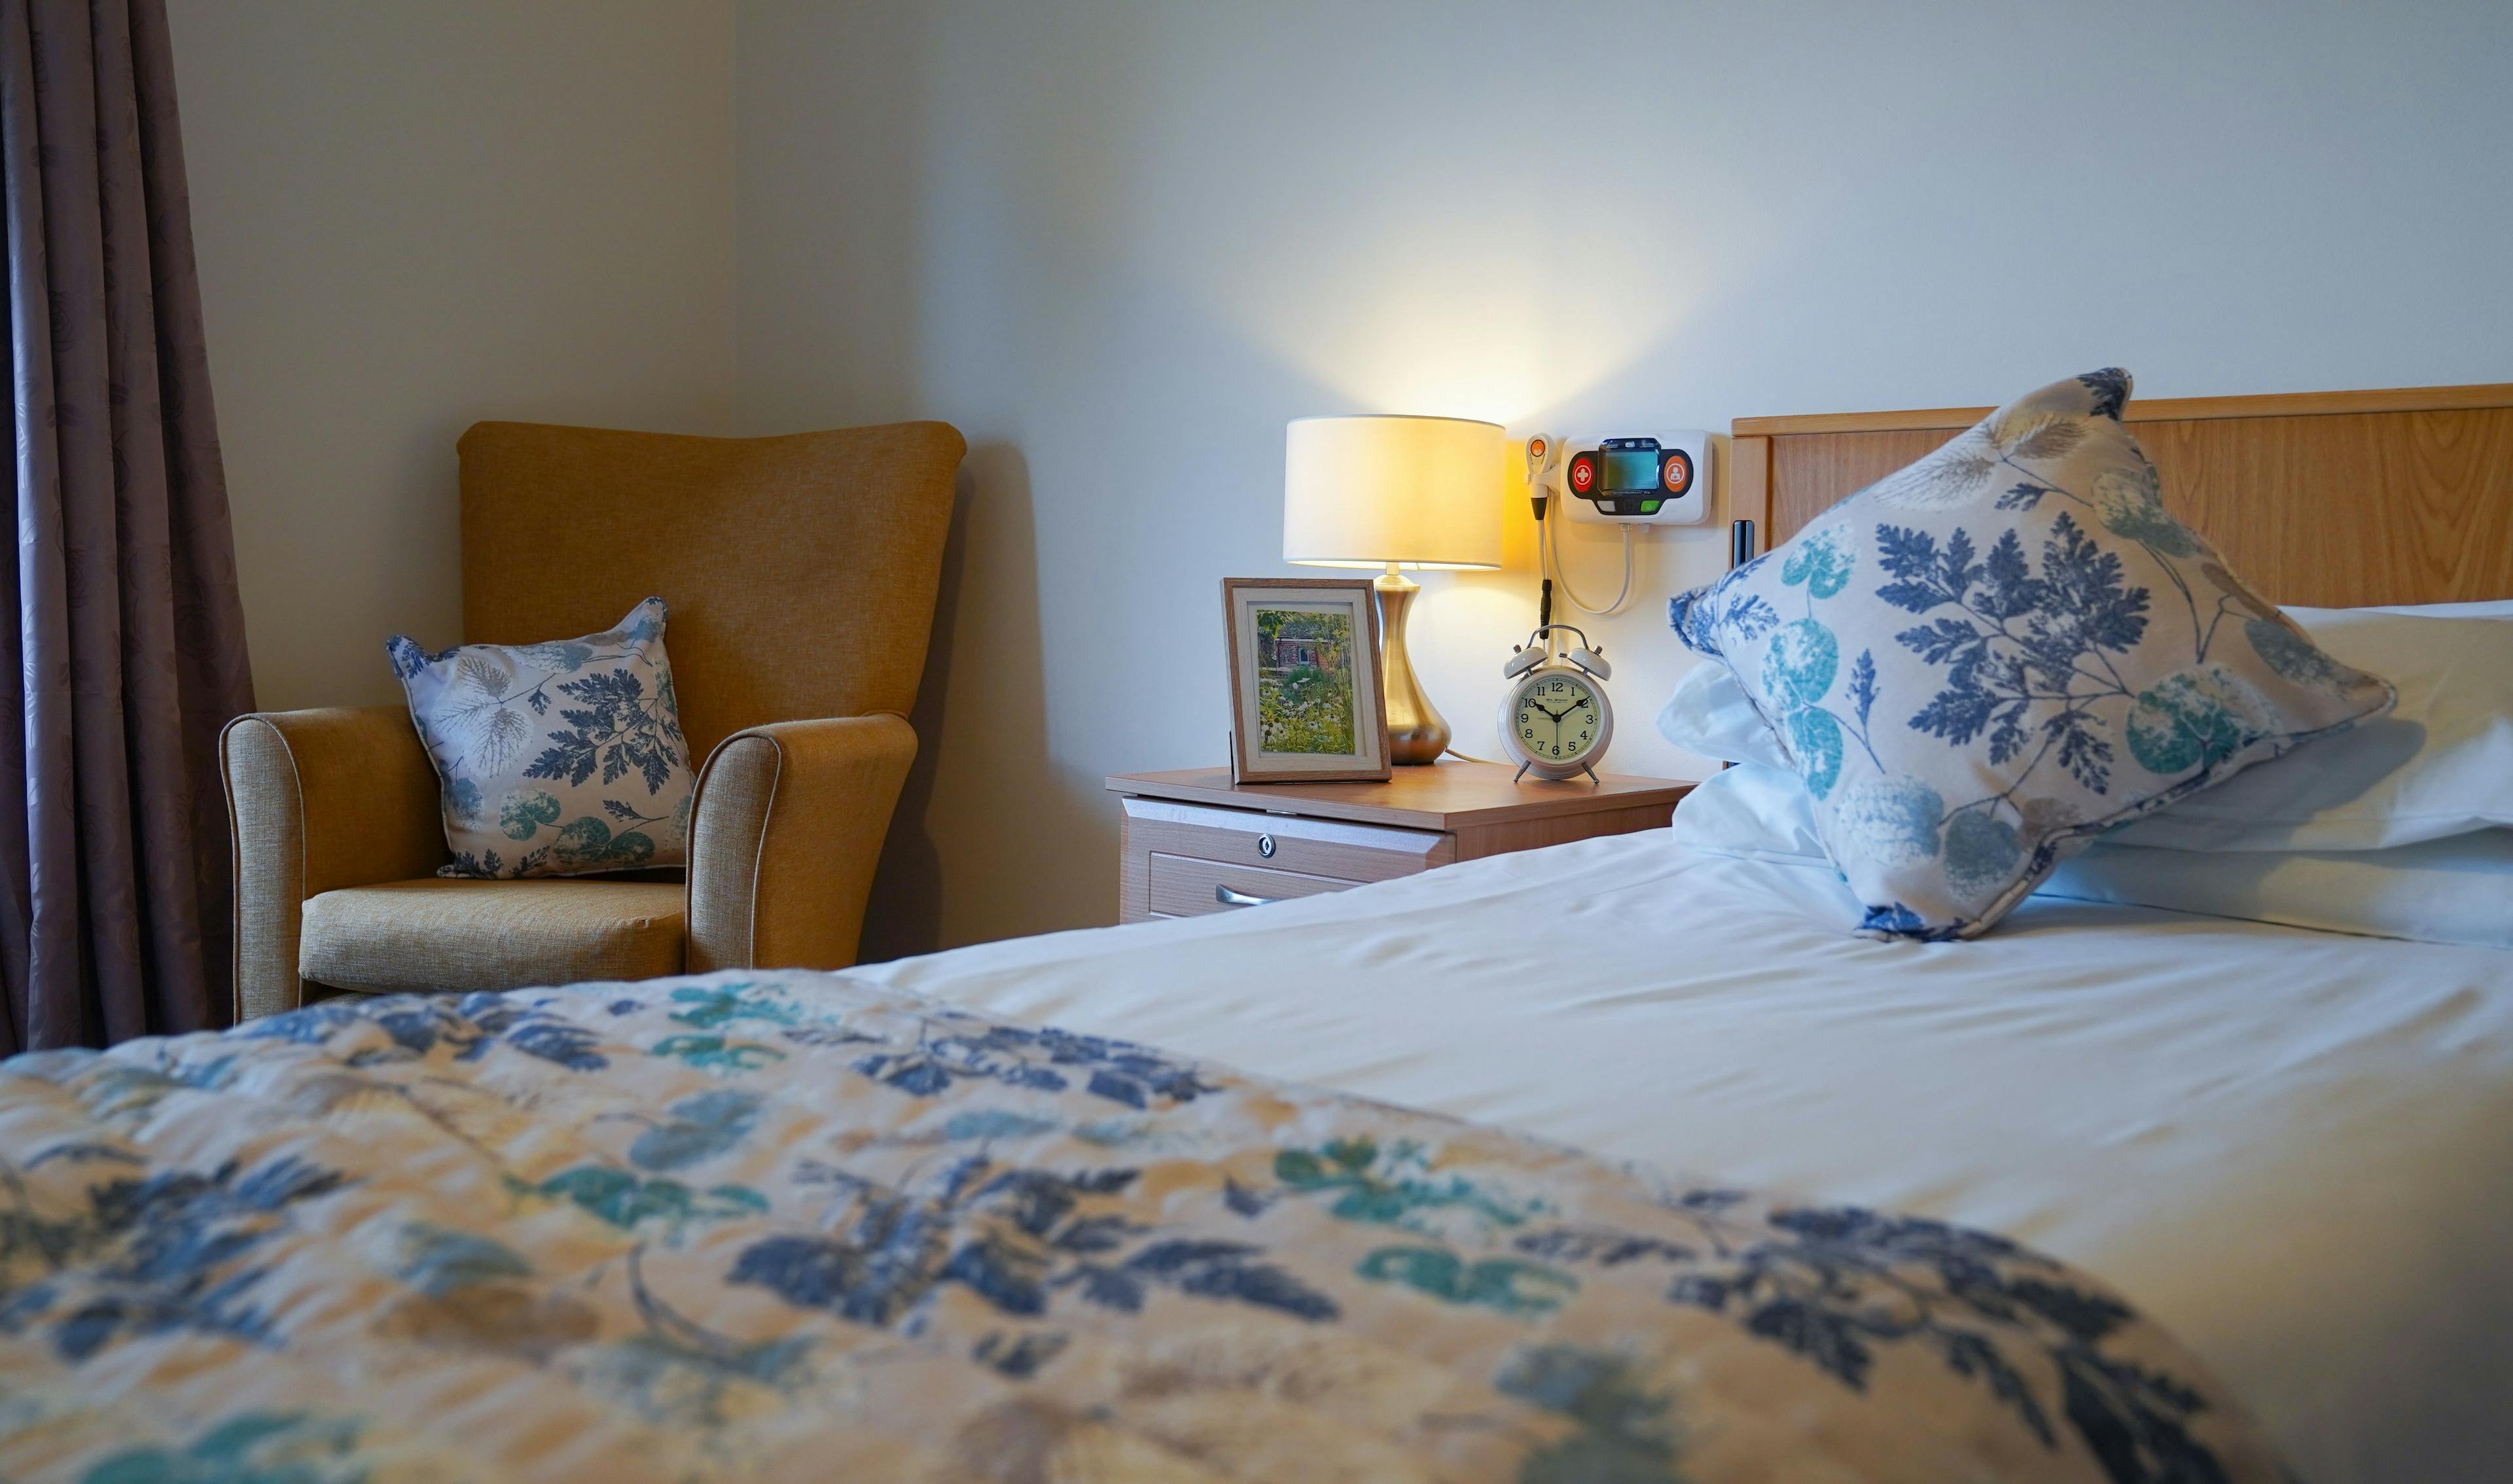 Bedroom at Don Thomas House Care Home in Harwich, Essex